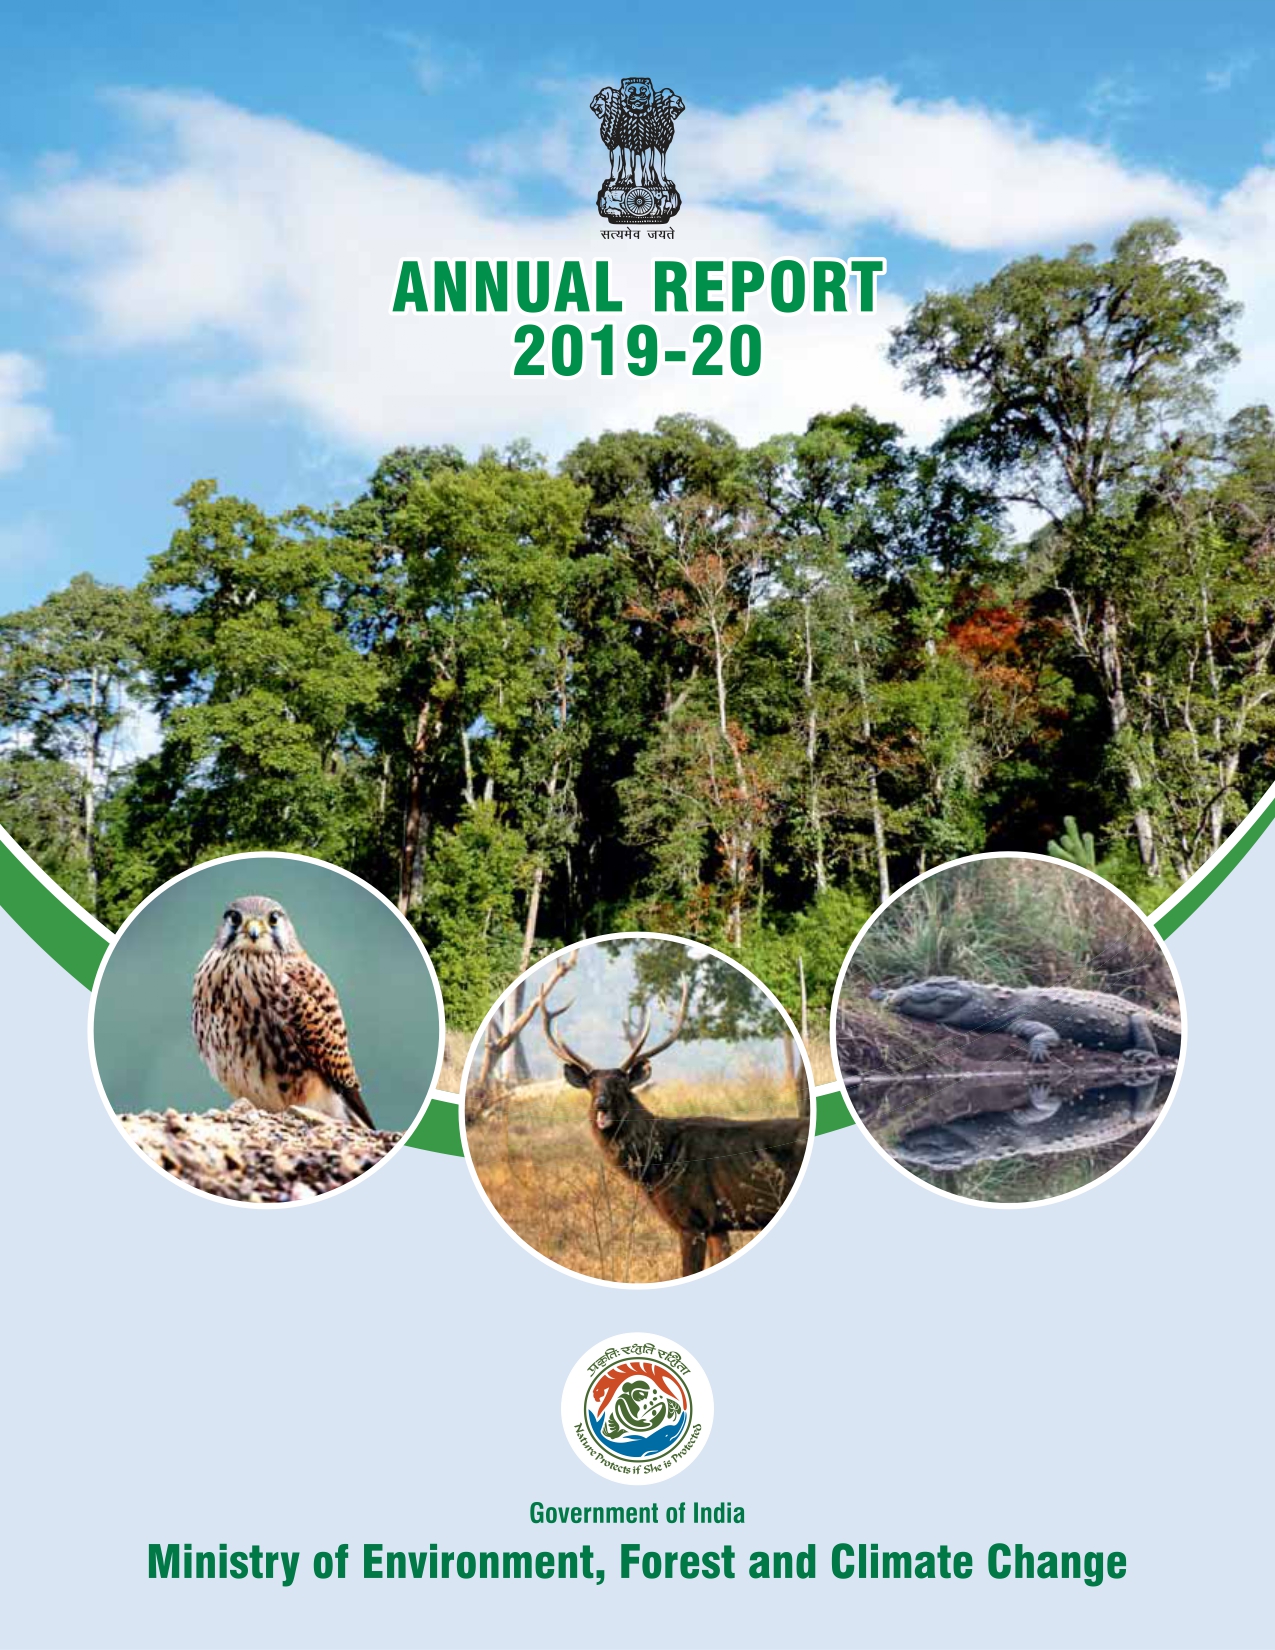 Image of cover of Annual Report 2019-2020